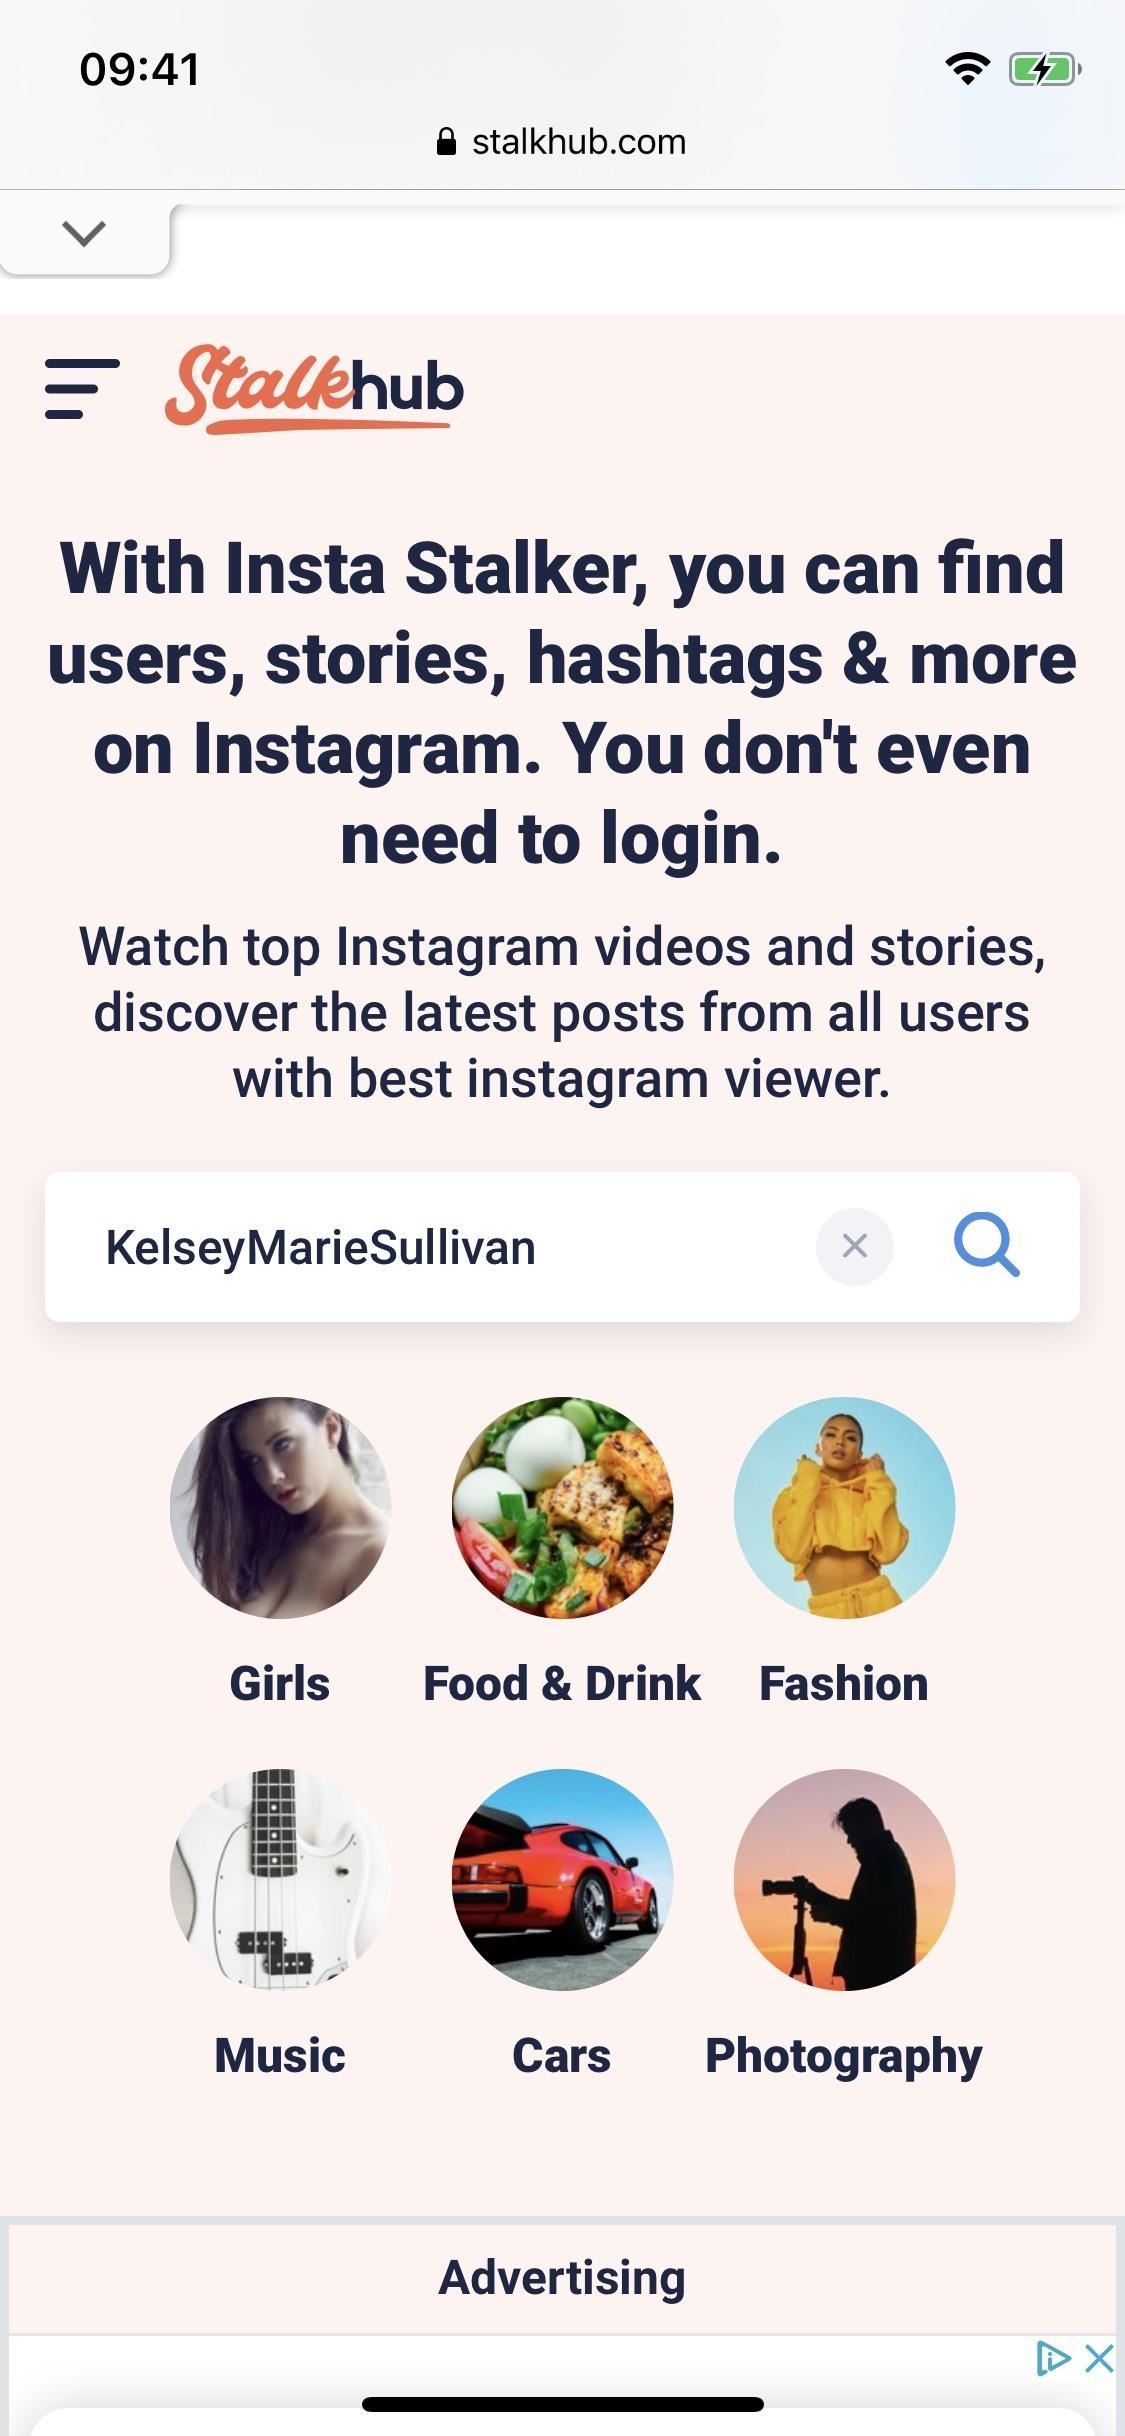 How to Anonymously View Instagram Stories & Posts Without an Account